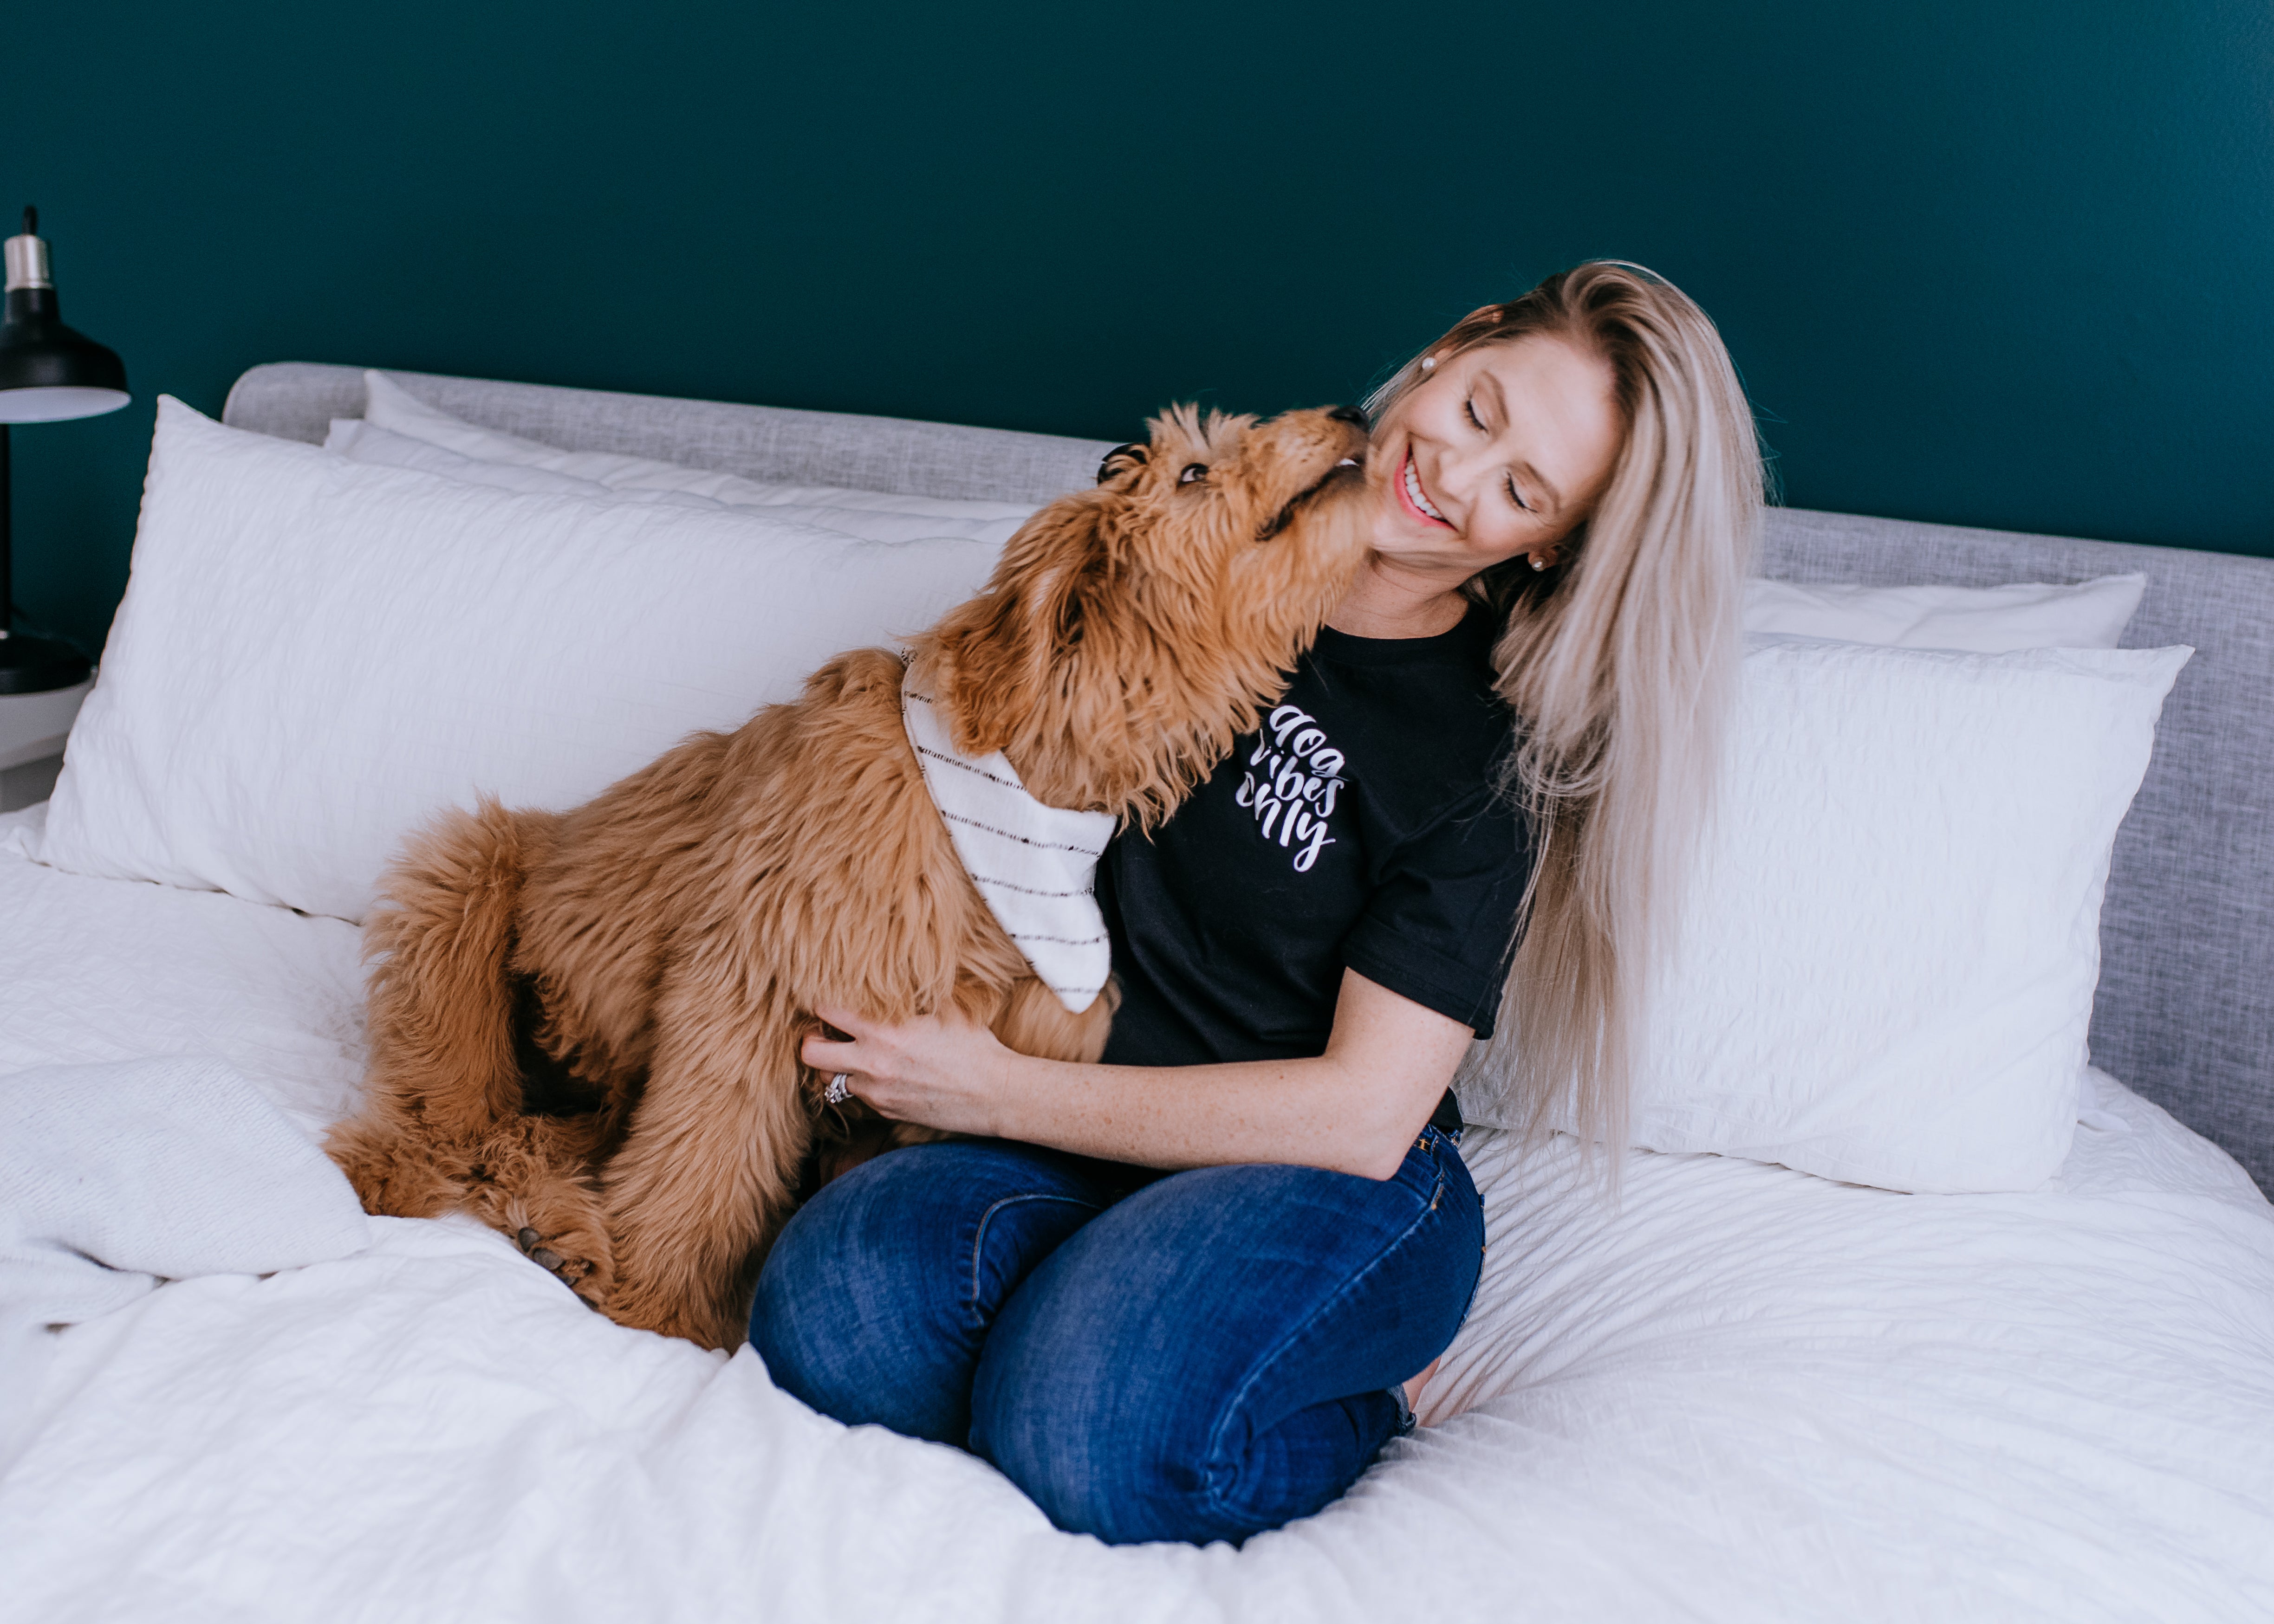 Dog Vibes Only T-Shirt